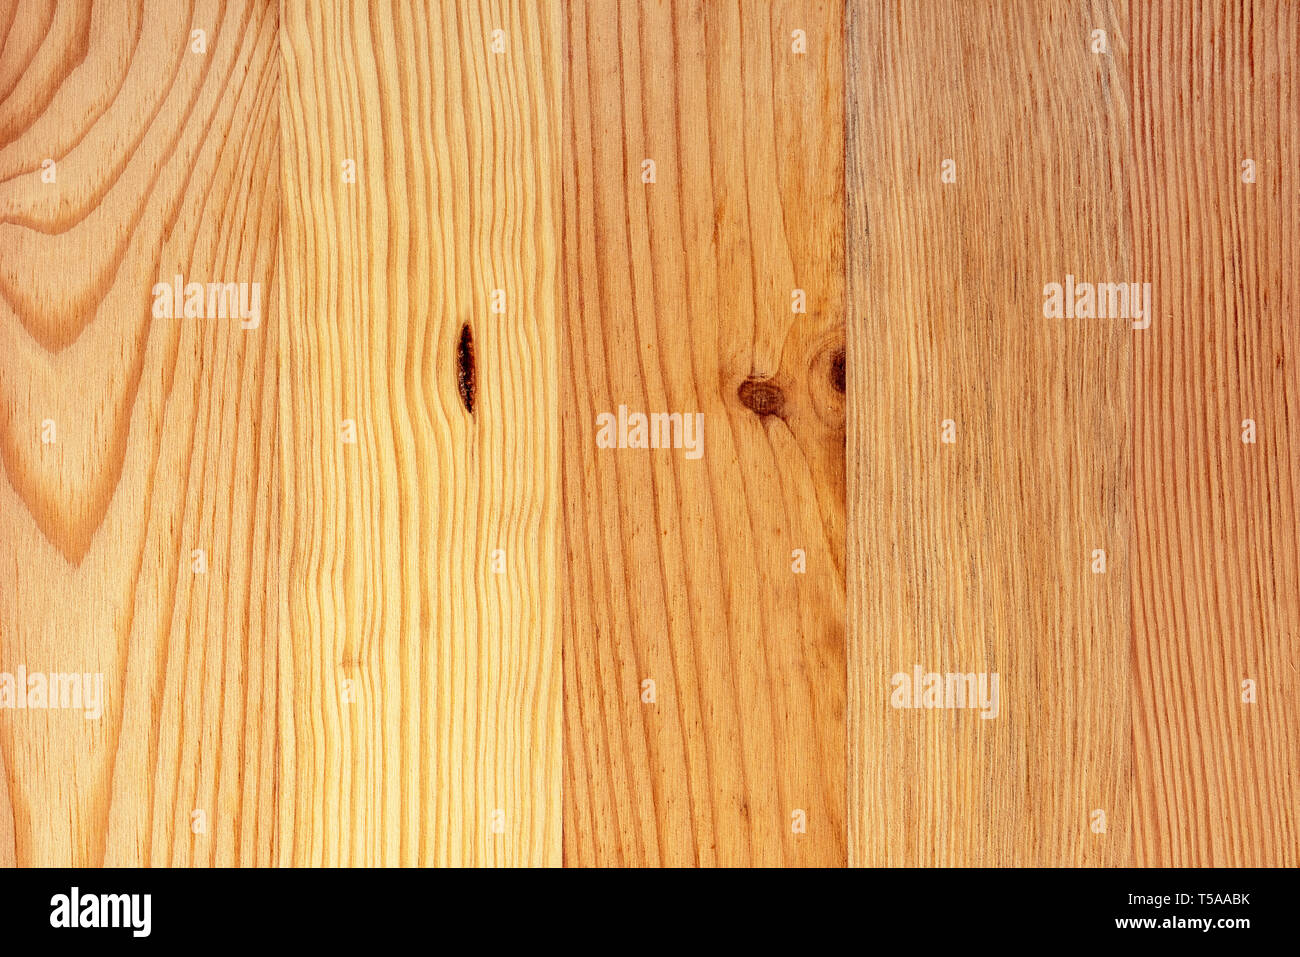 Pine wood flooring board texture, decorative natural pattern as background, top view Stock Photo